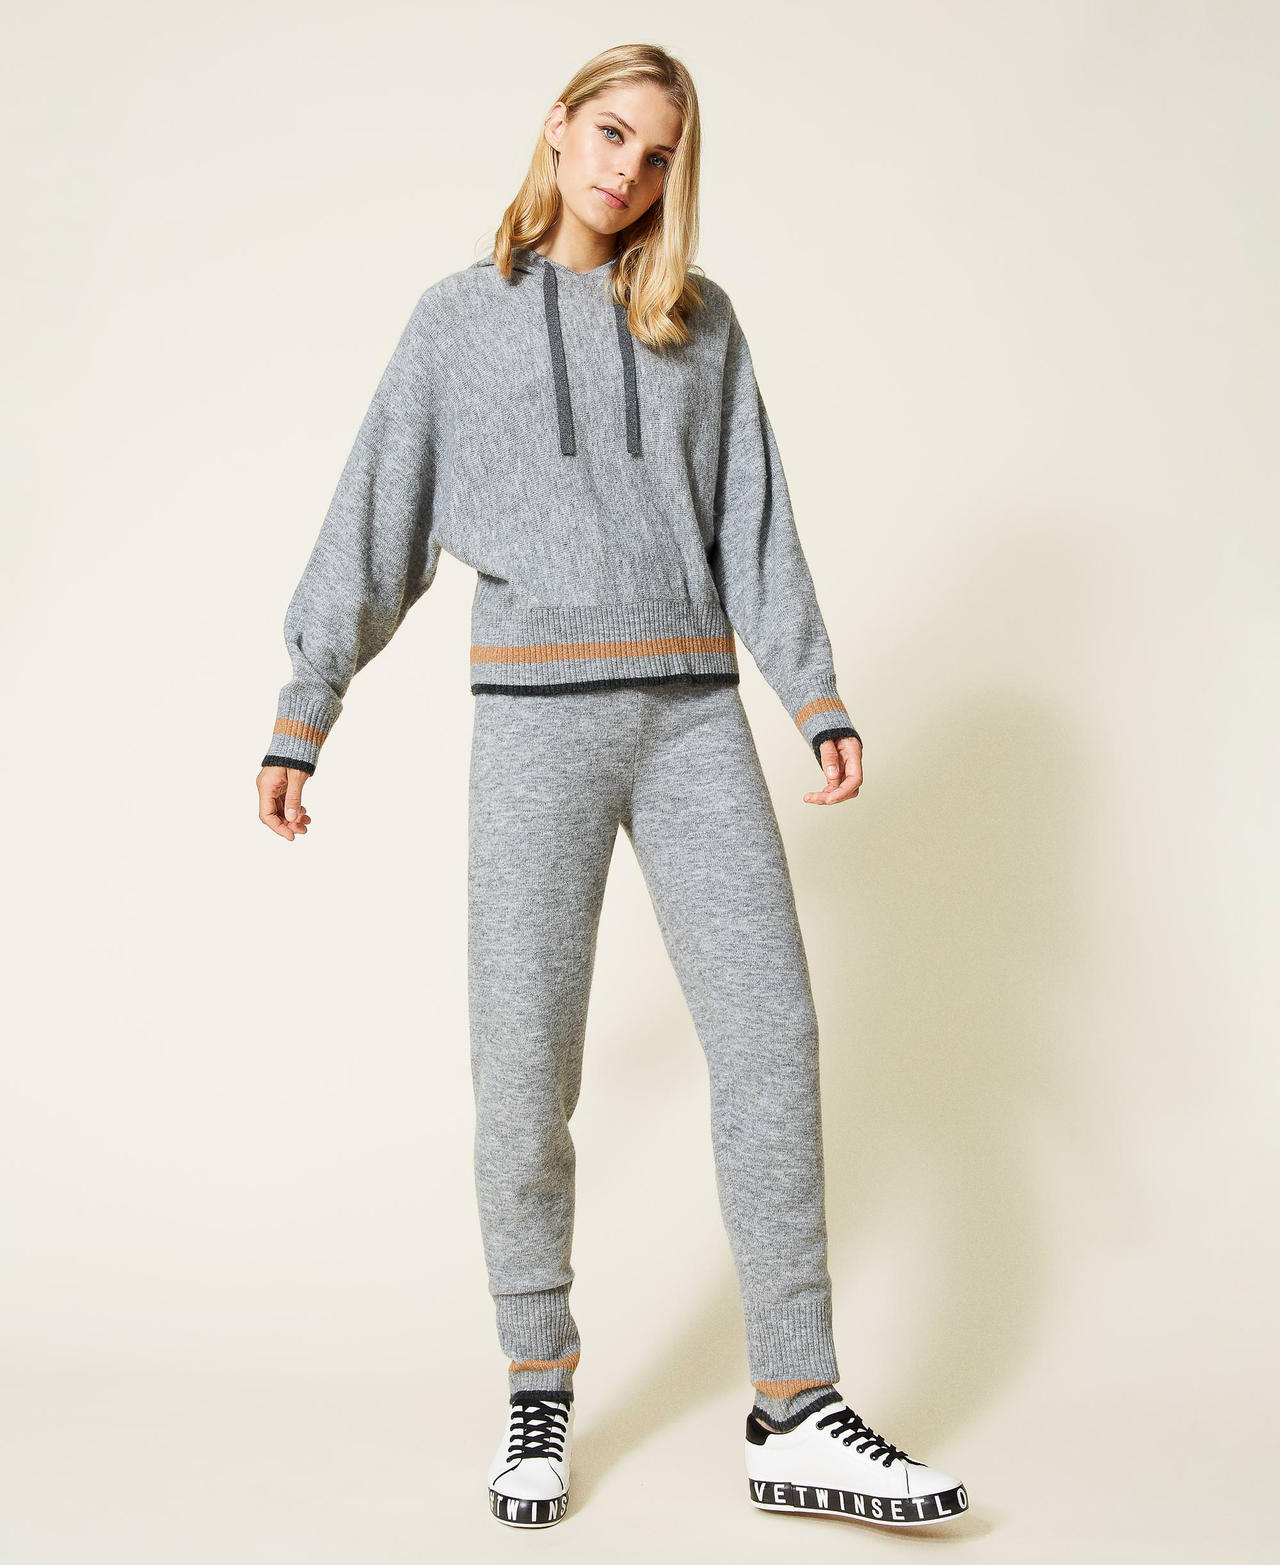 Hooded jumper and joggers Grey Marl / Anthracite / Desert Light Multicolour Woman 212LI3QGG-02